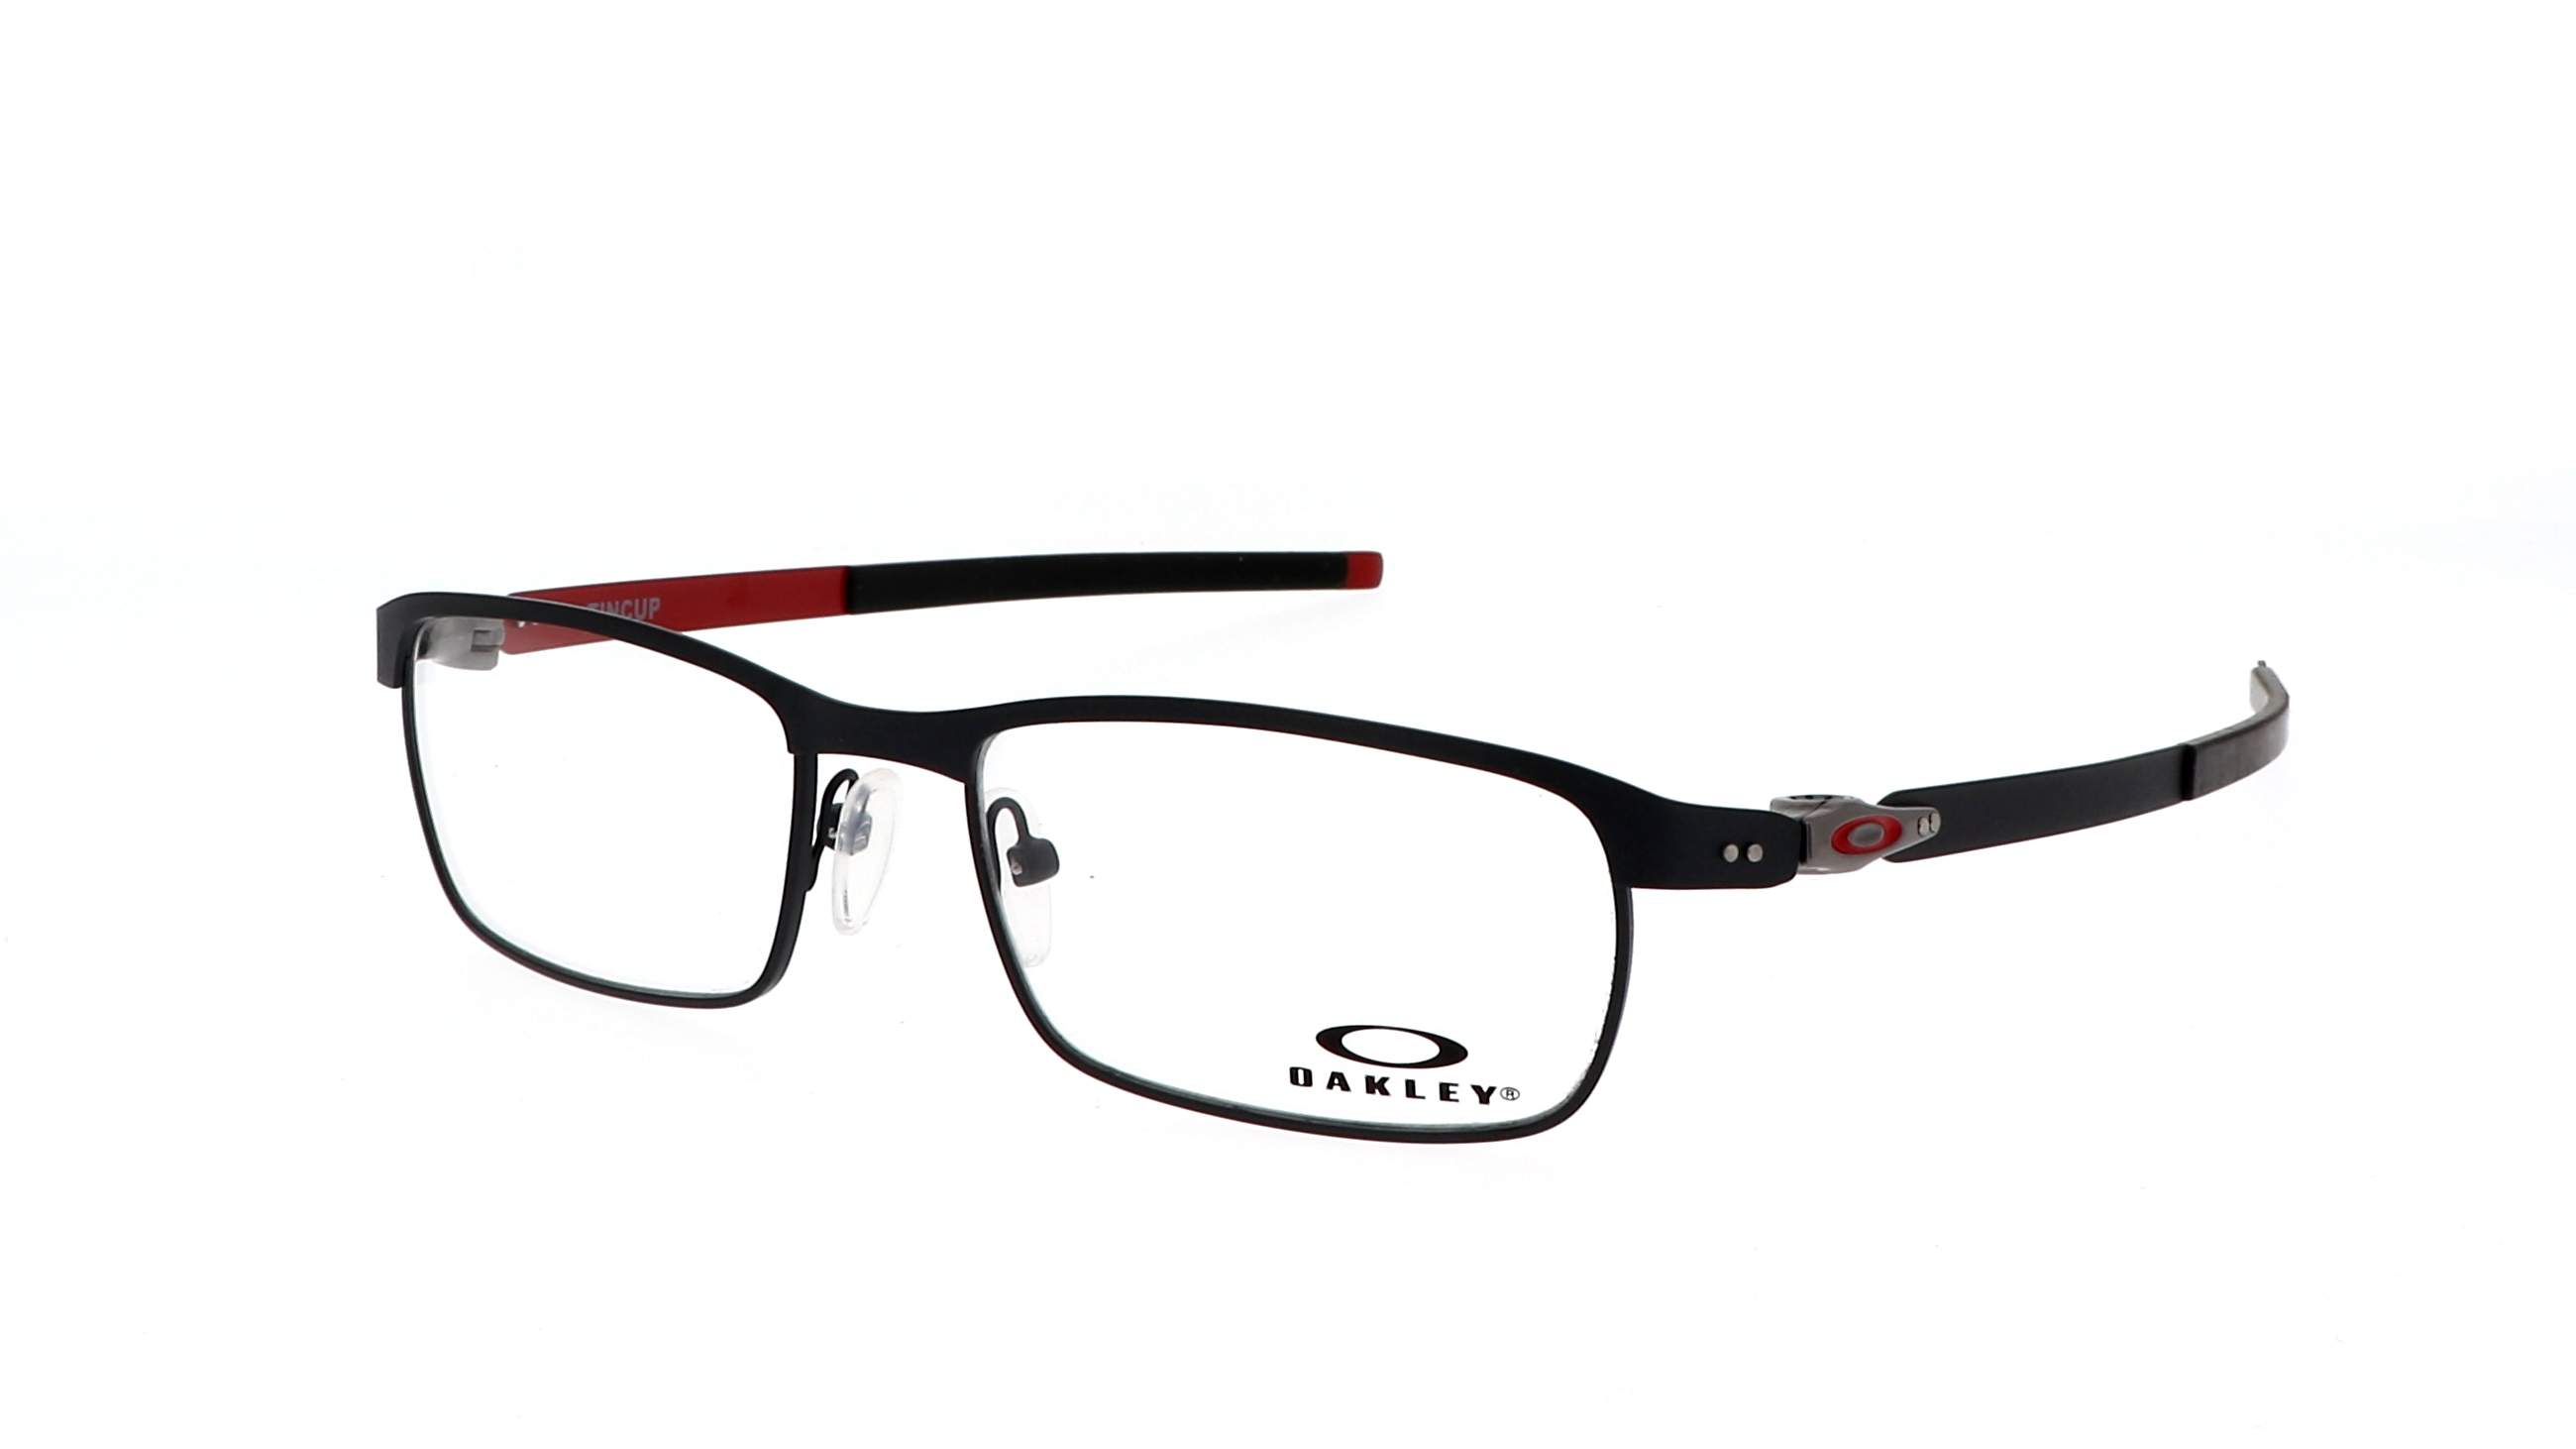 oakley ox3184 tincup